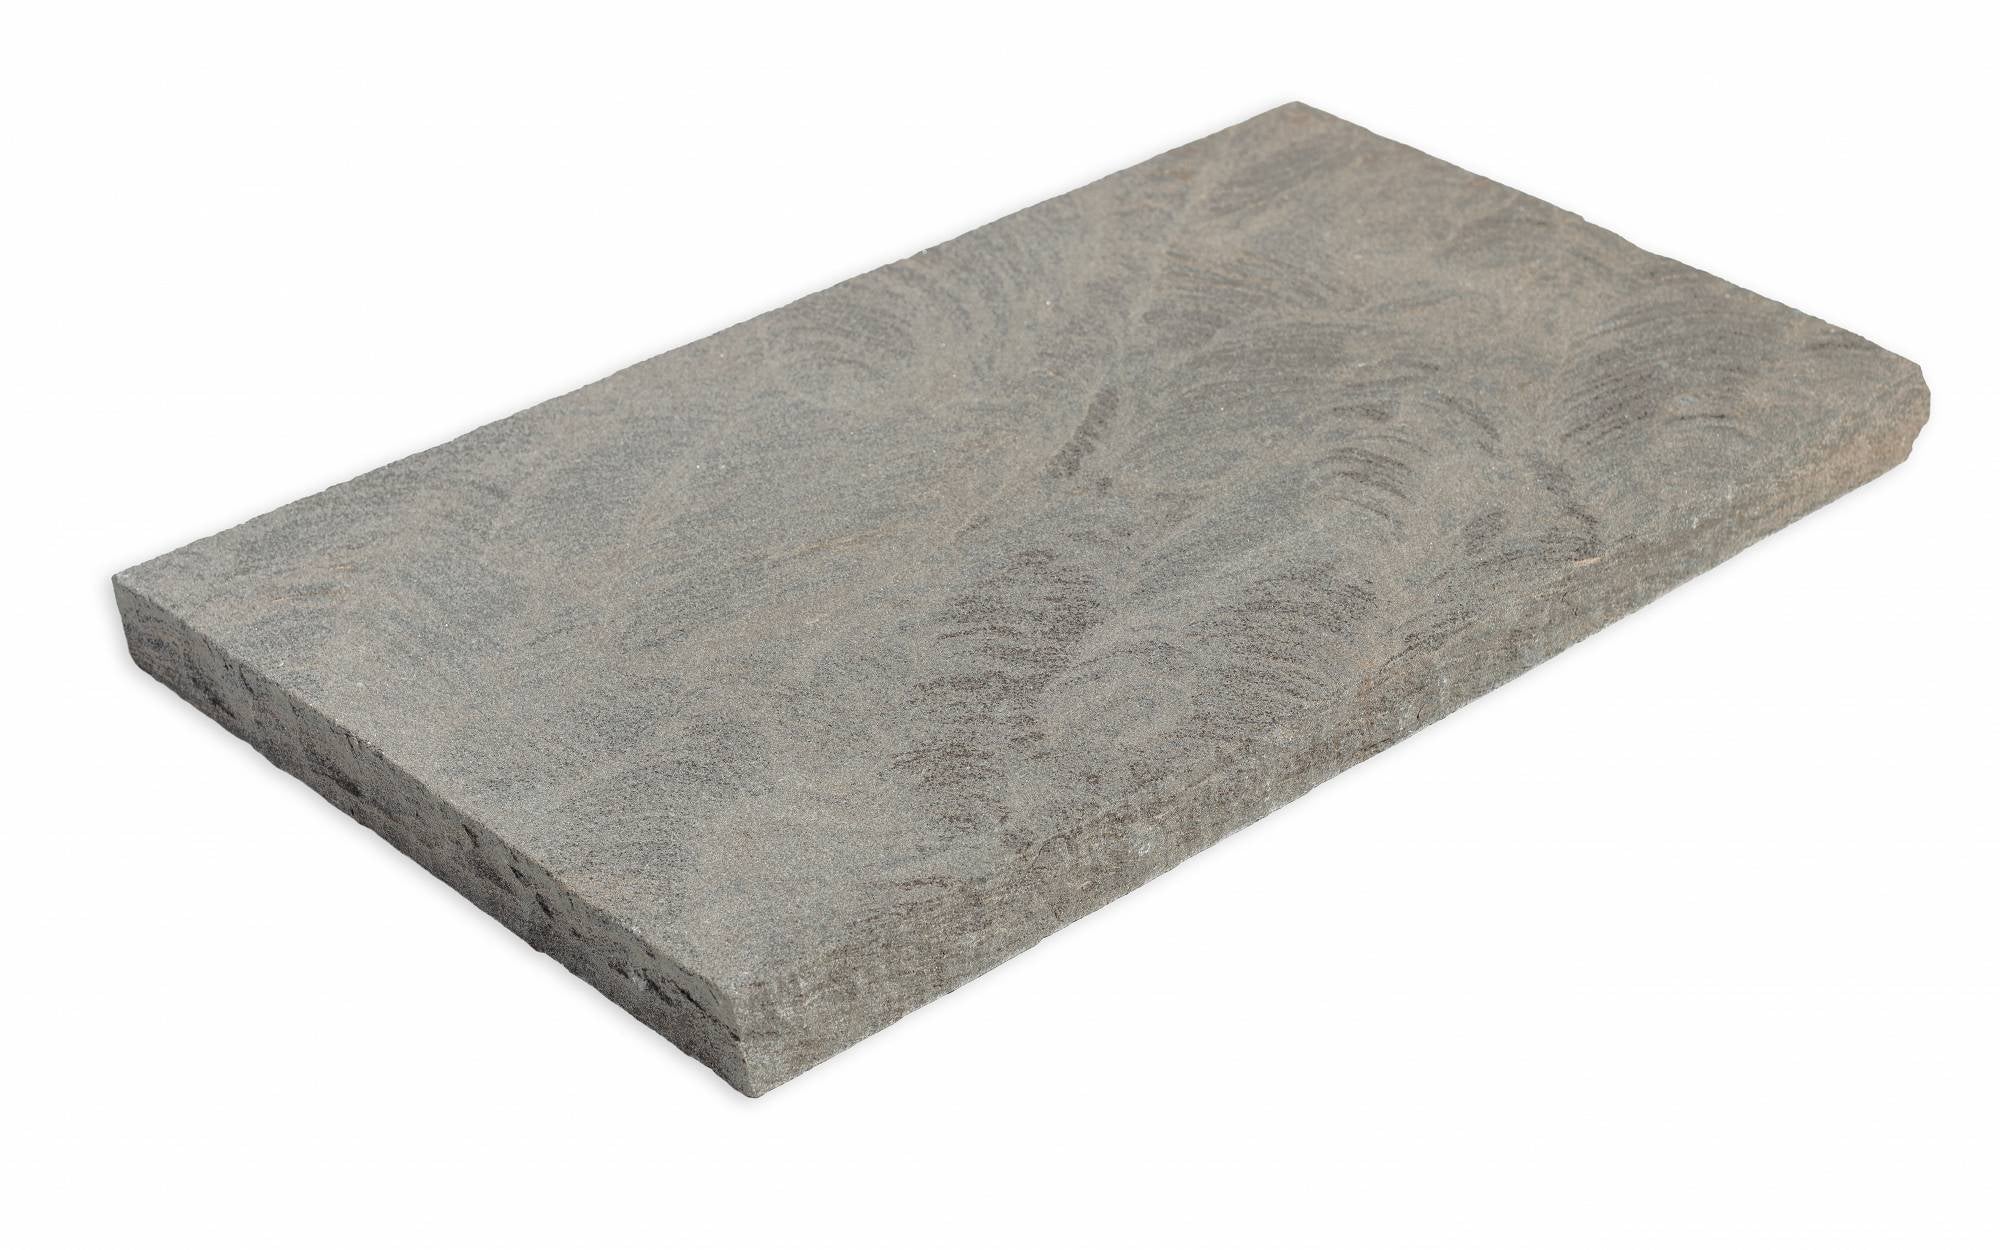 sable old world flagstone signature paver cap molding 18 by 18 by 2 inch exterior applications manufactured by f and m supply distributed by surface group